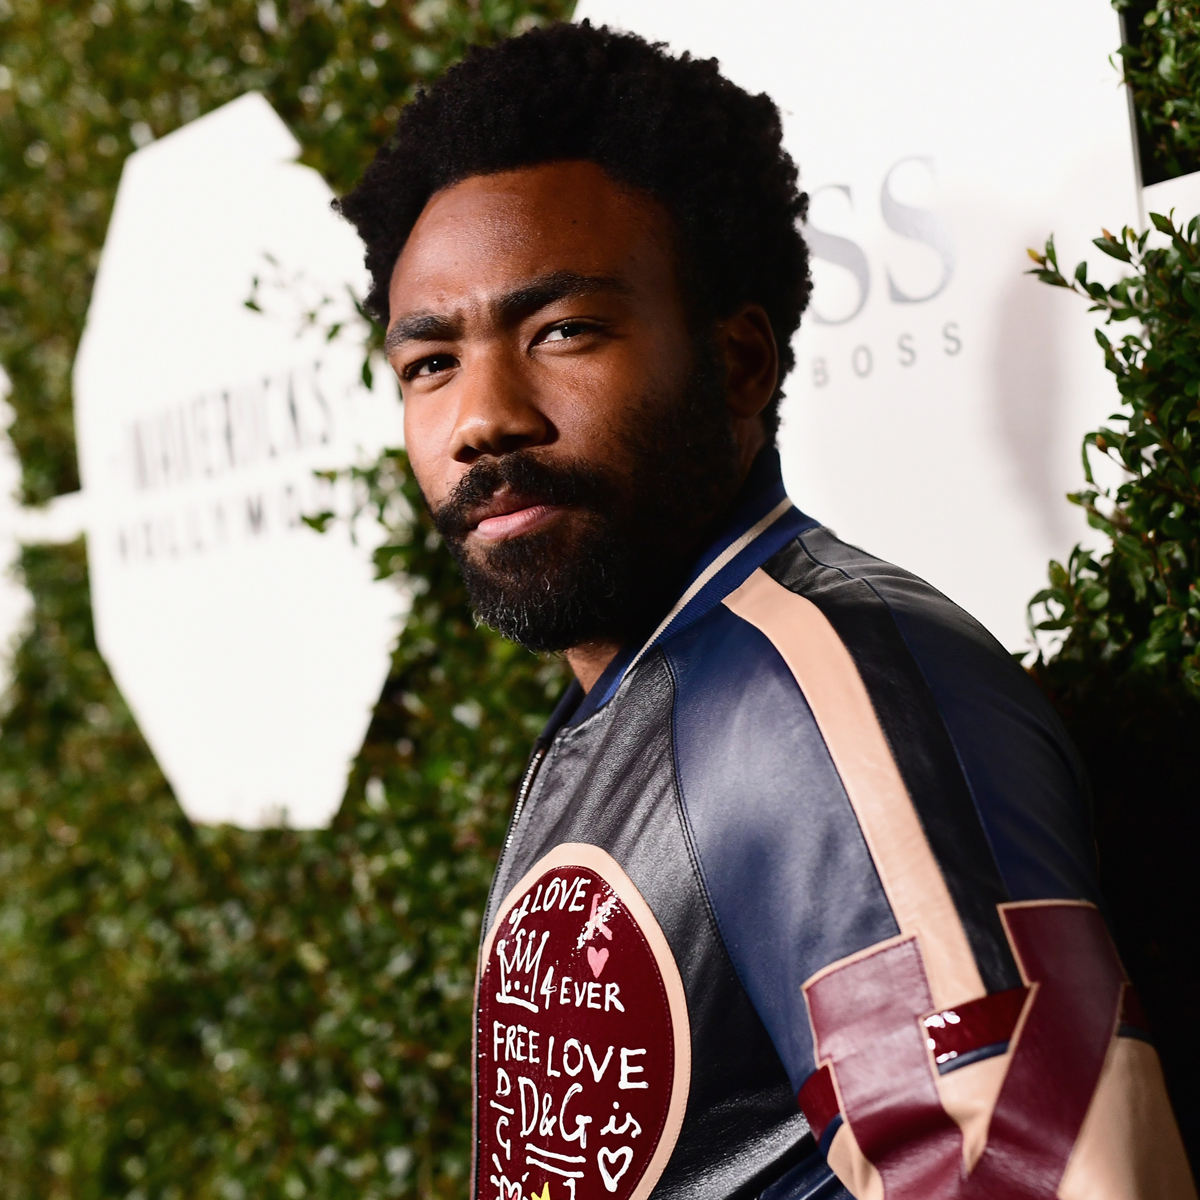 Donald Glover Rejects Notion Atlanta Isn’t “Black Enough”